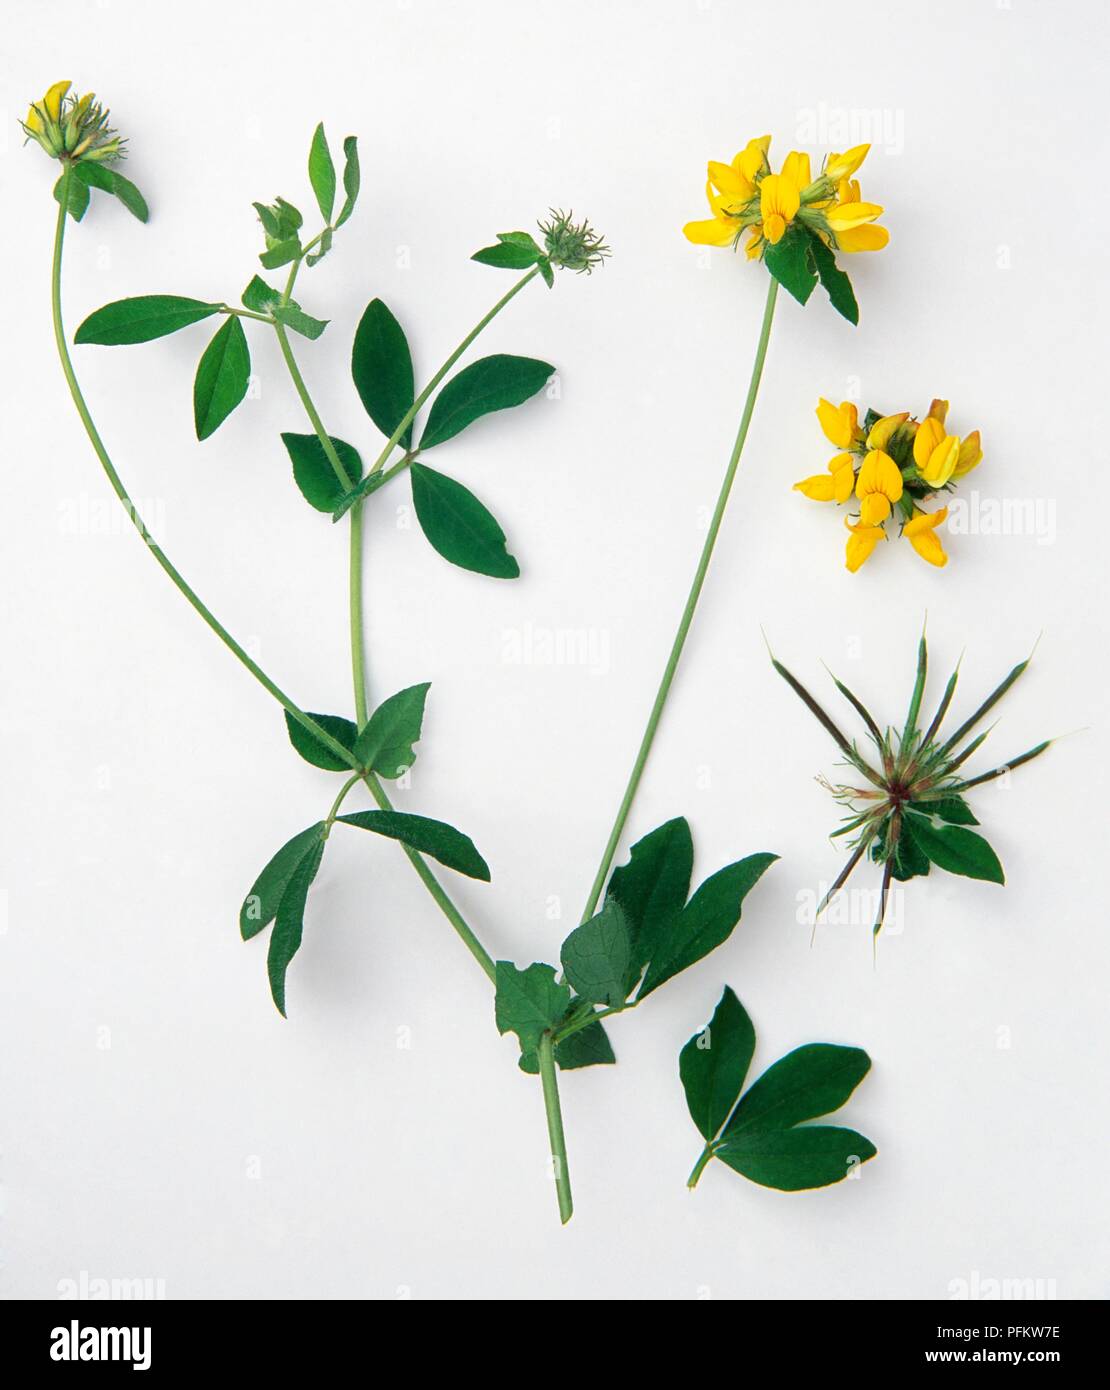 Lotus pedunculatus (Greater bird's-foot trefoil), stems with yellow flowers, and separately, flower head with brownish black fruit Stock Photo